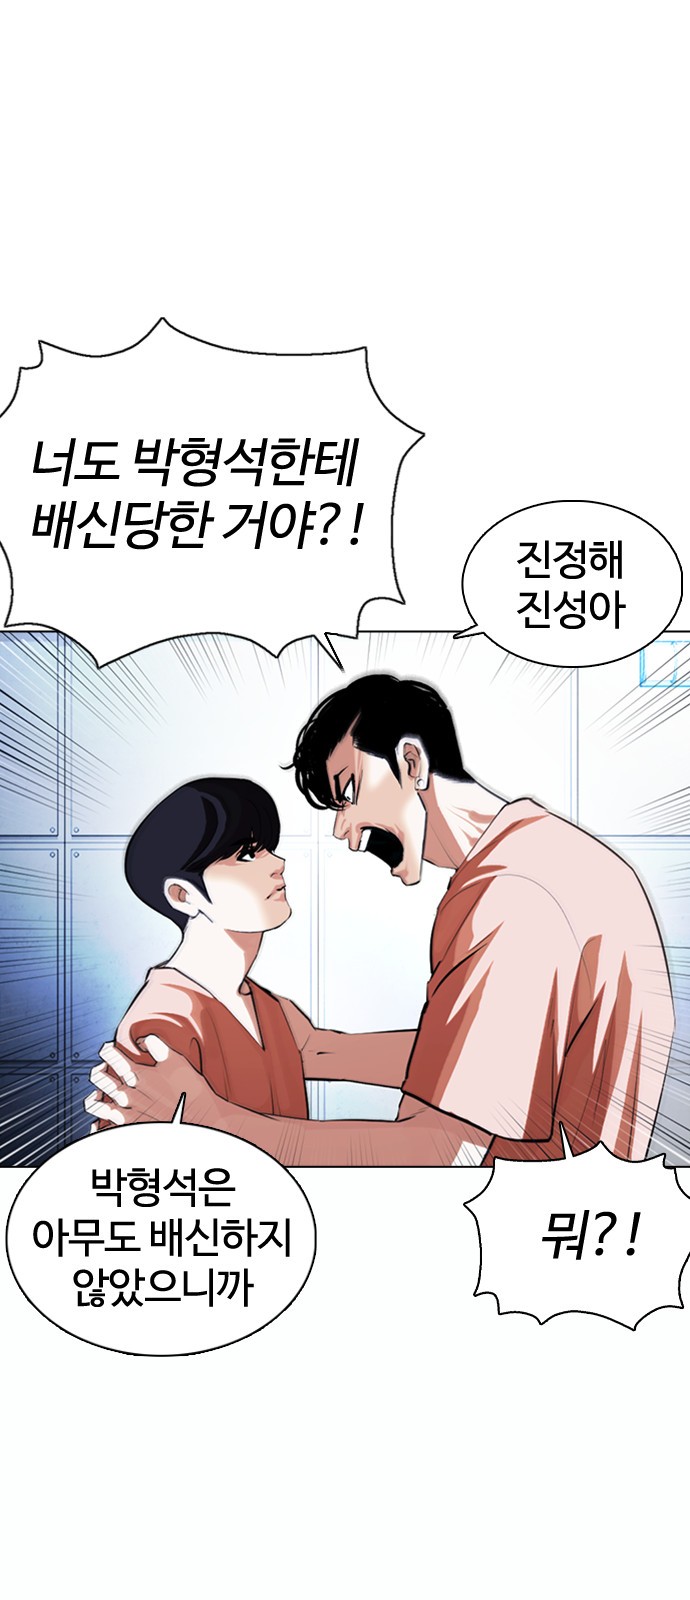 Lookism - Chapter 377 - Page 3